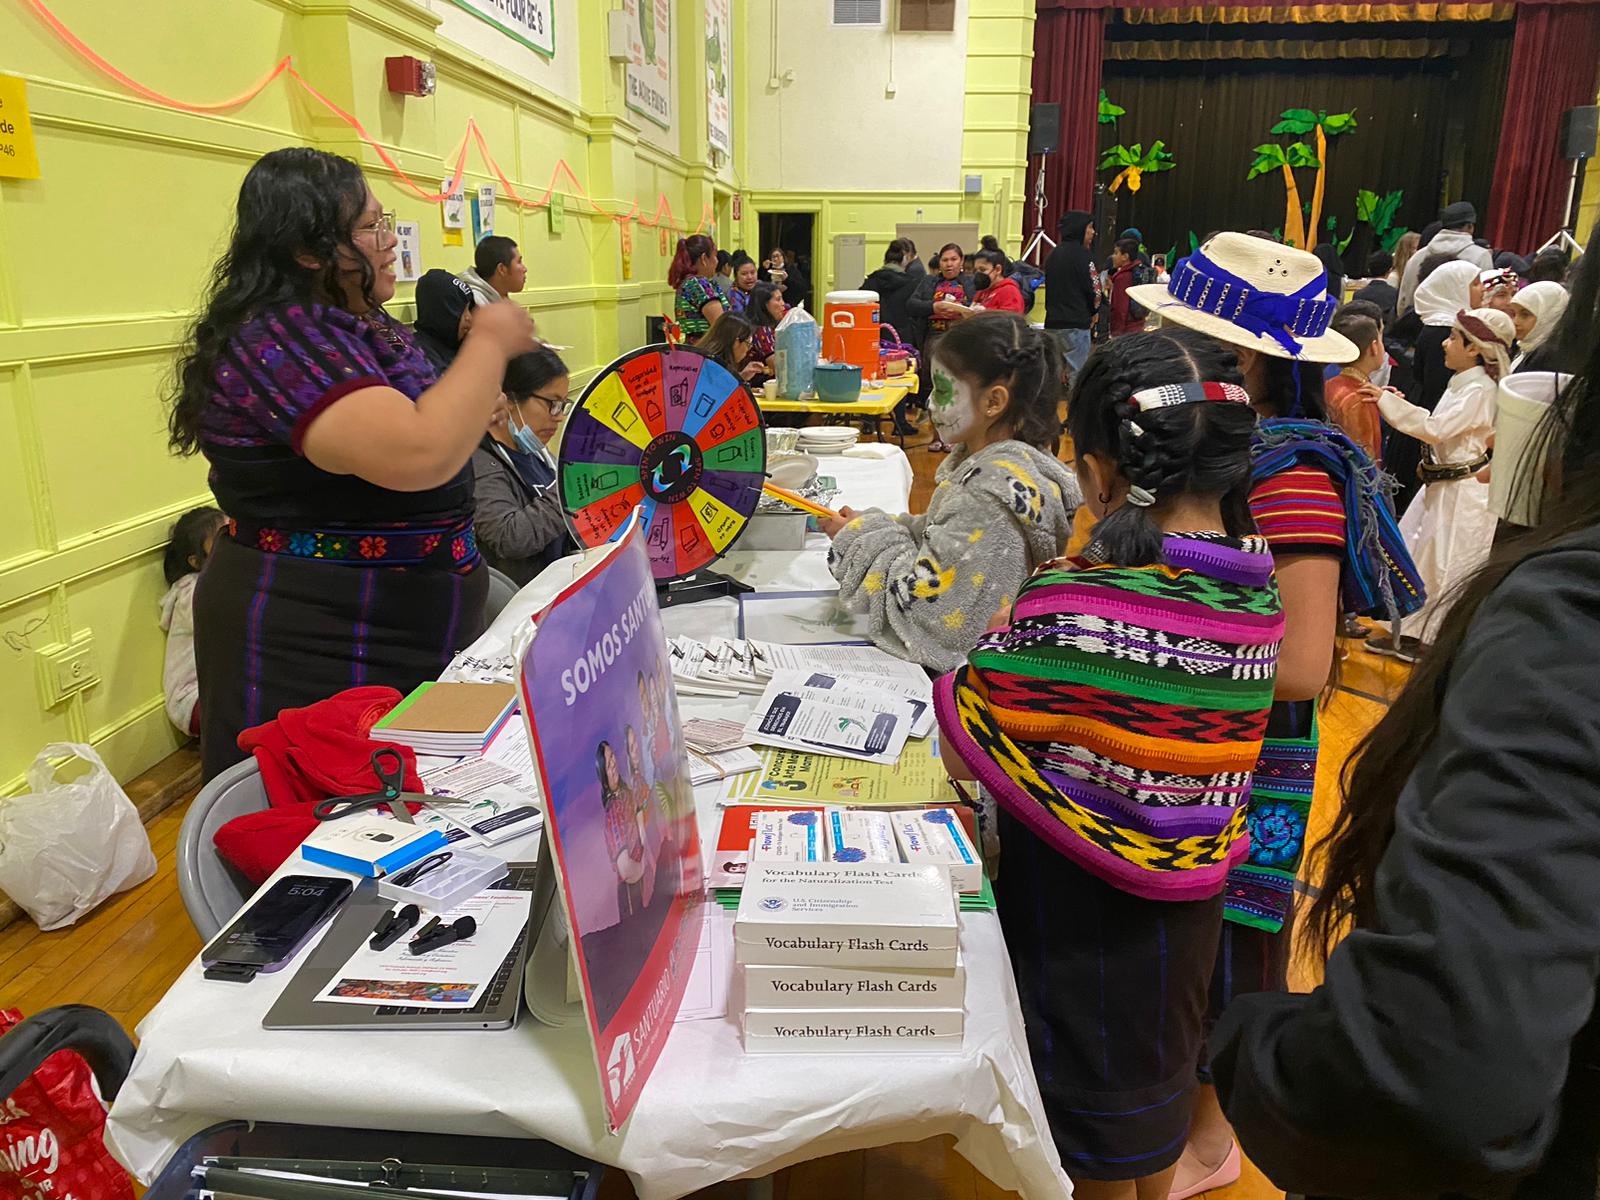 Two staff members of the Mayan Voices Outreach team share information about their programs to a group of children at an elementary school cultural event